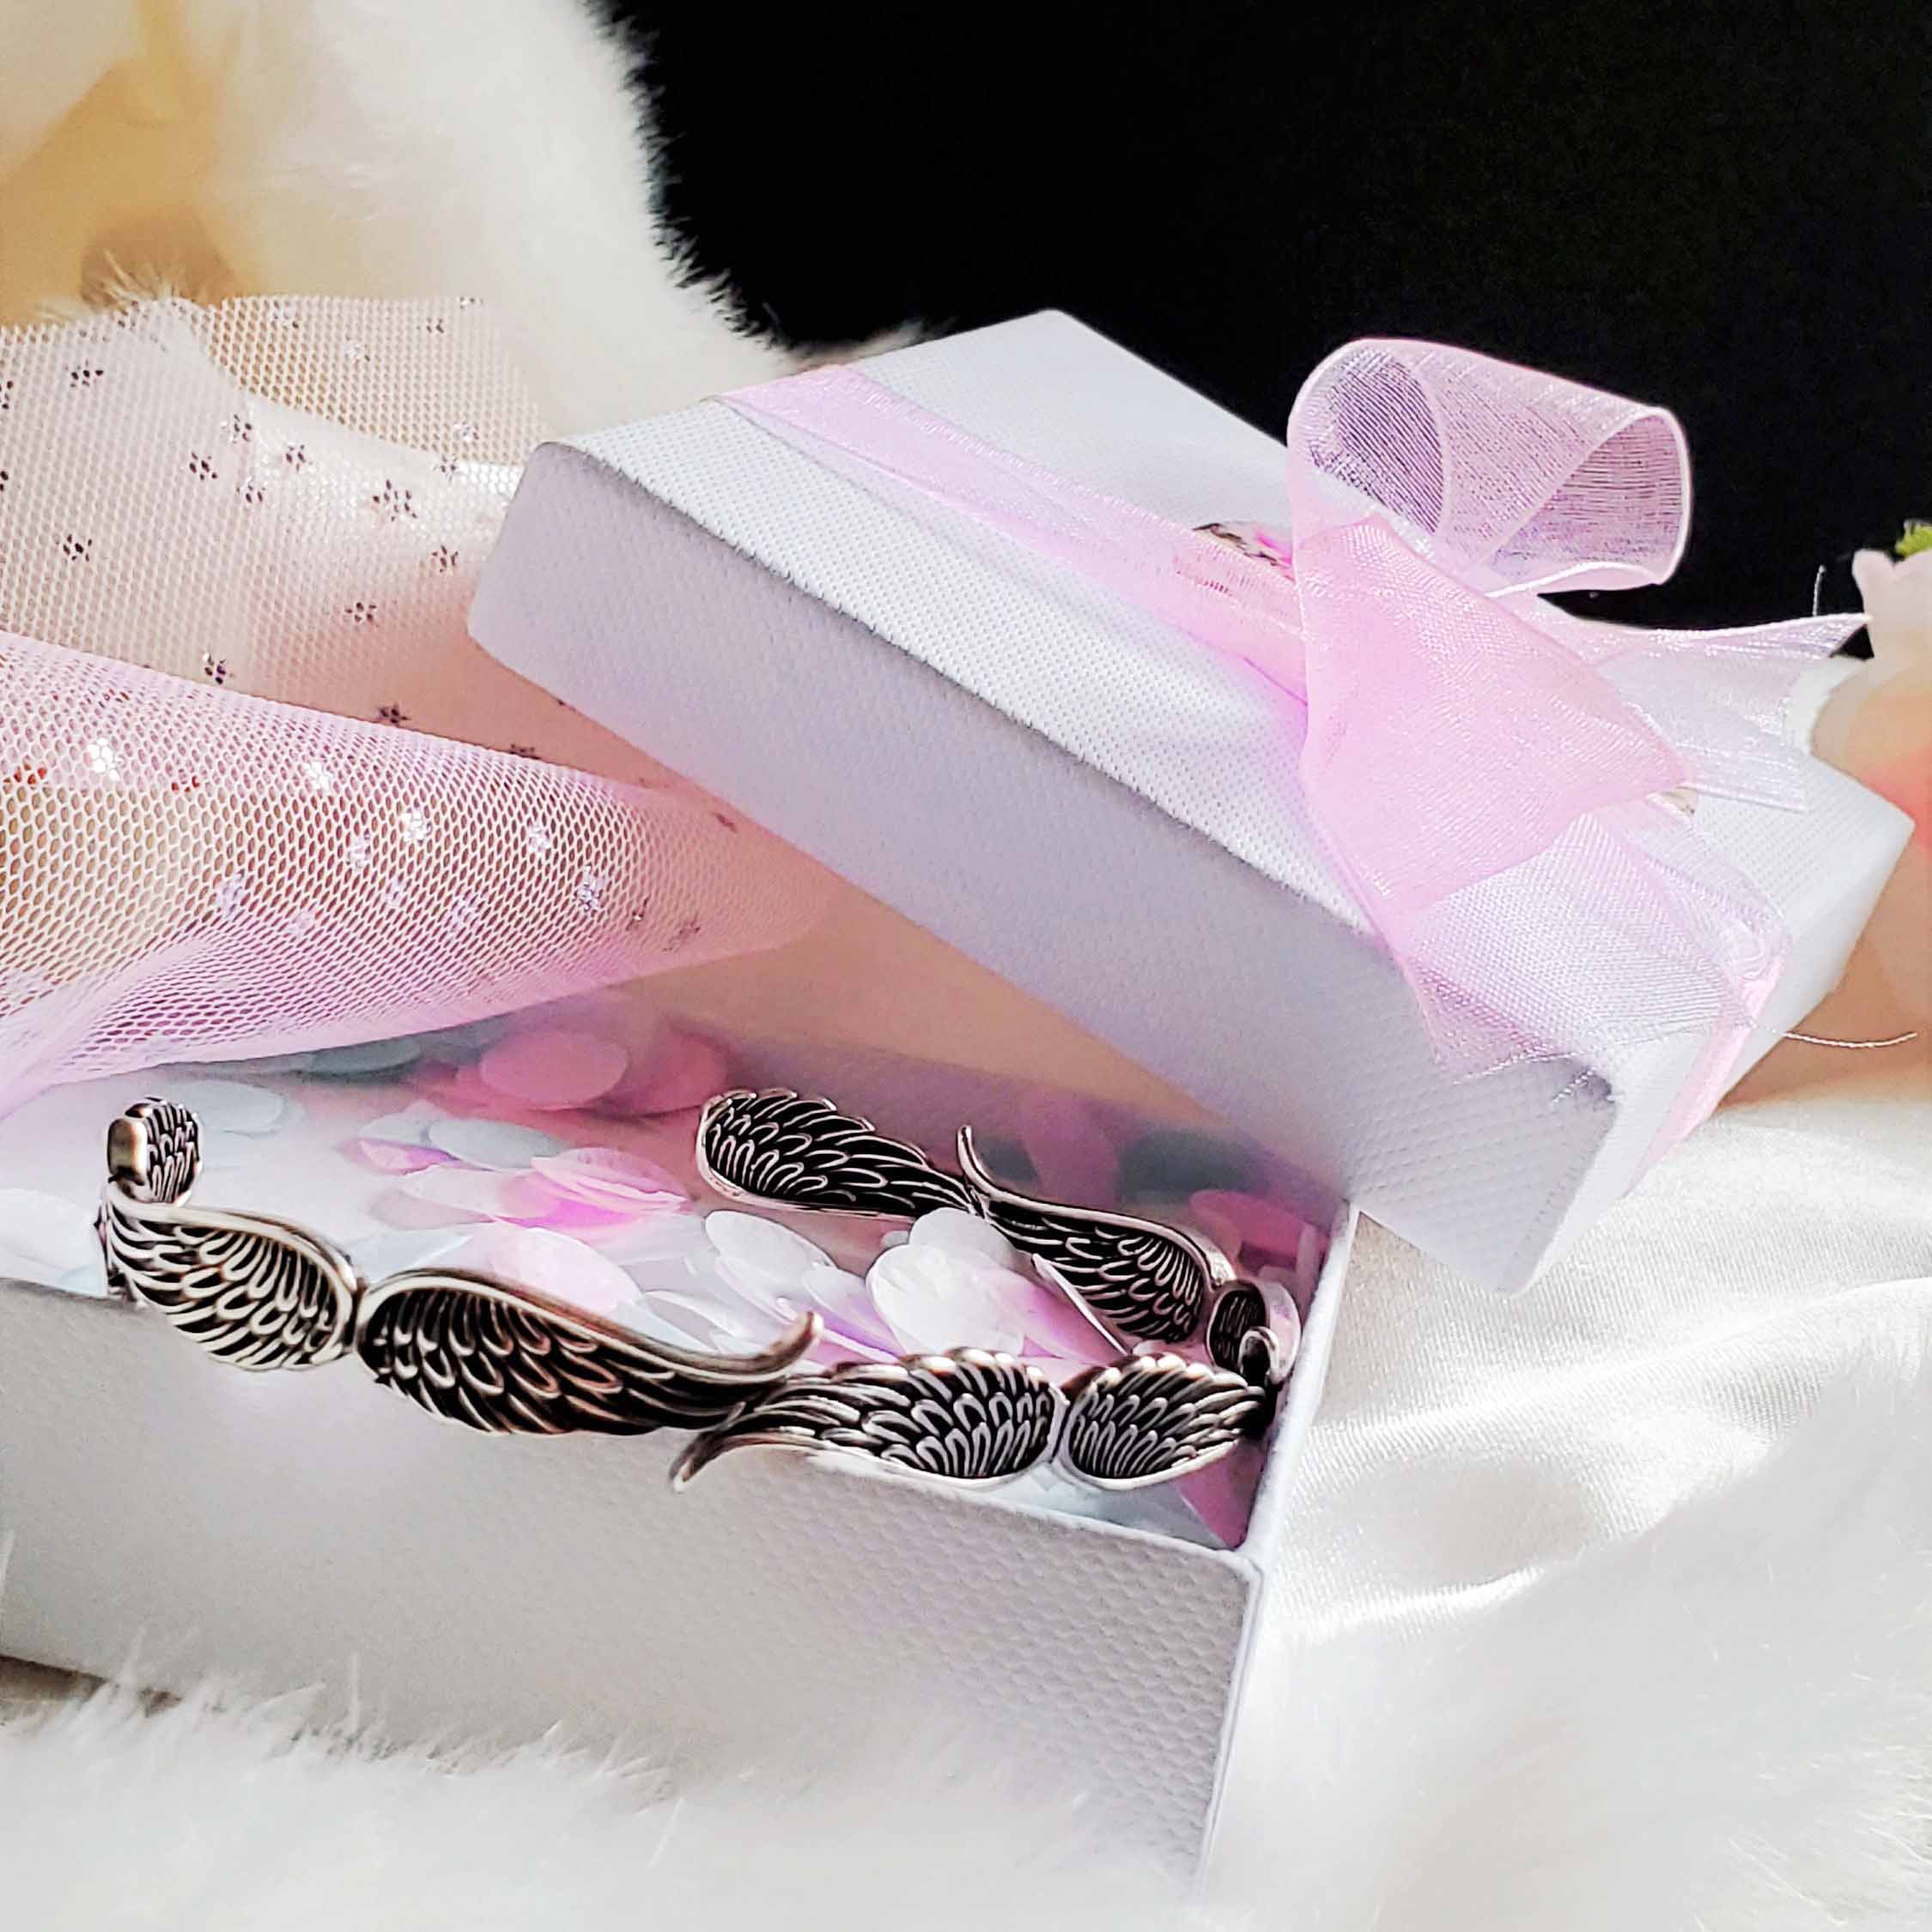 🎁CHRISTMAS SALE - 49% OFF🎅Angel Wings Vintage Style Sterling Silver Bracelet-Buy 2 Free Shipping Today